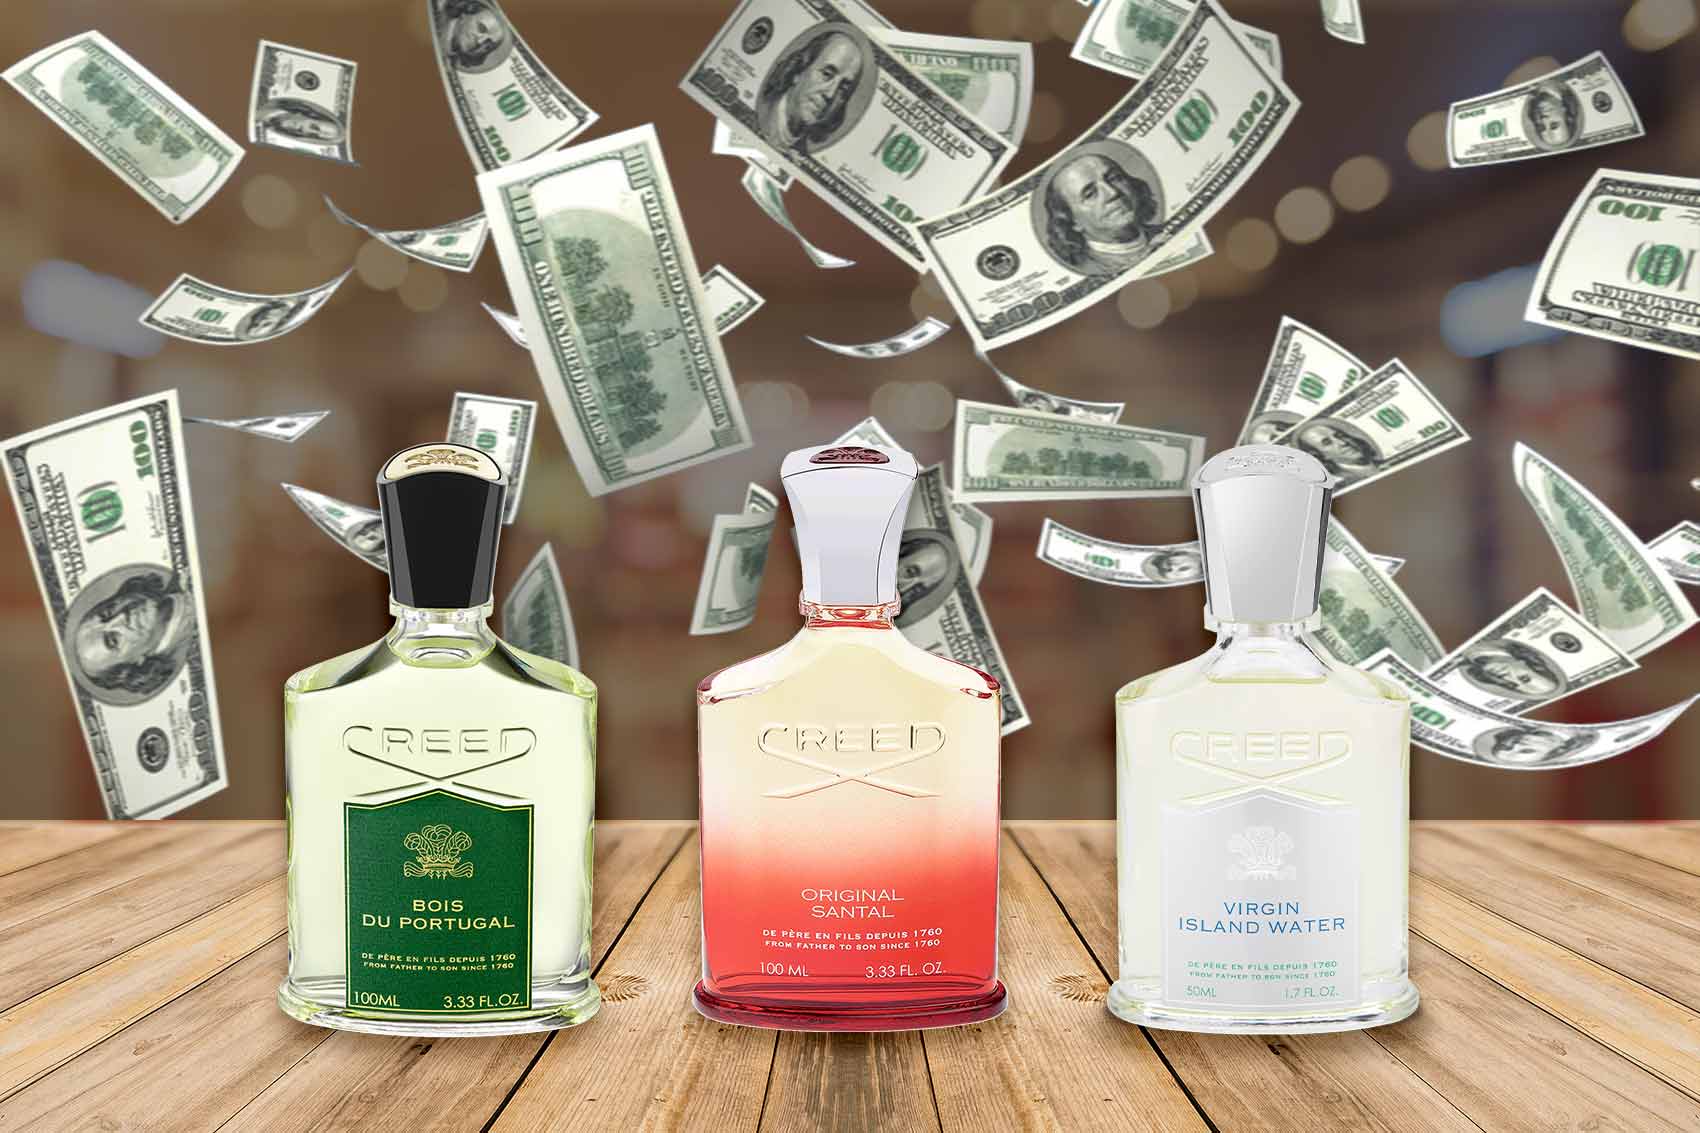 Why is creed perfume and cologne so expensive